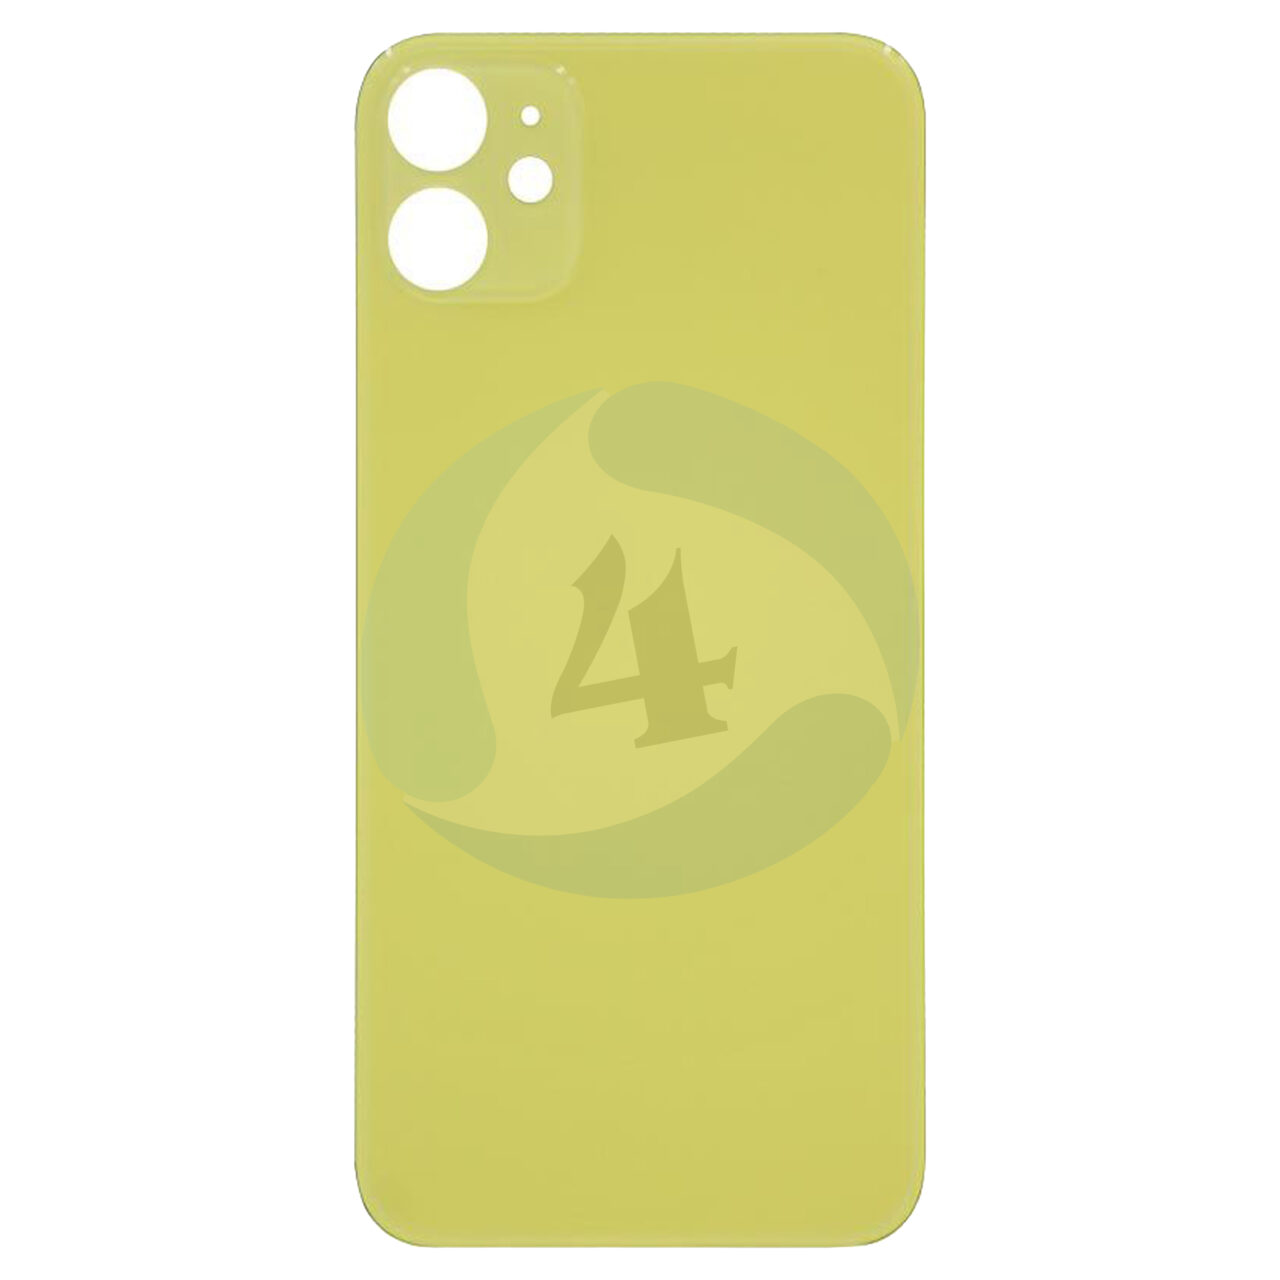 For Apple i Phone 11 backcover battery cover Yellow big holl